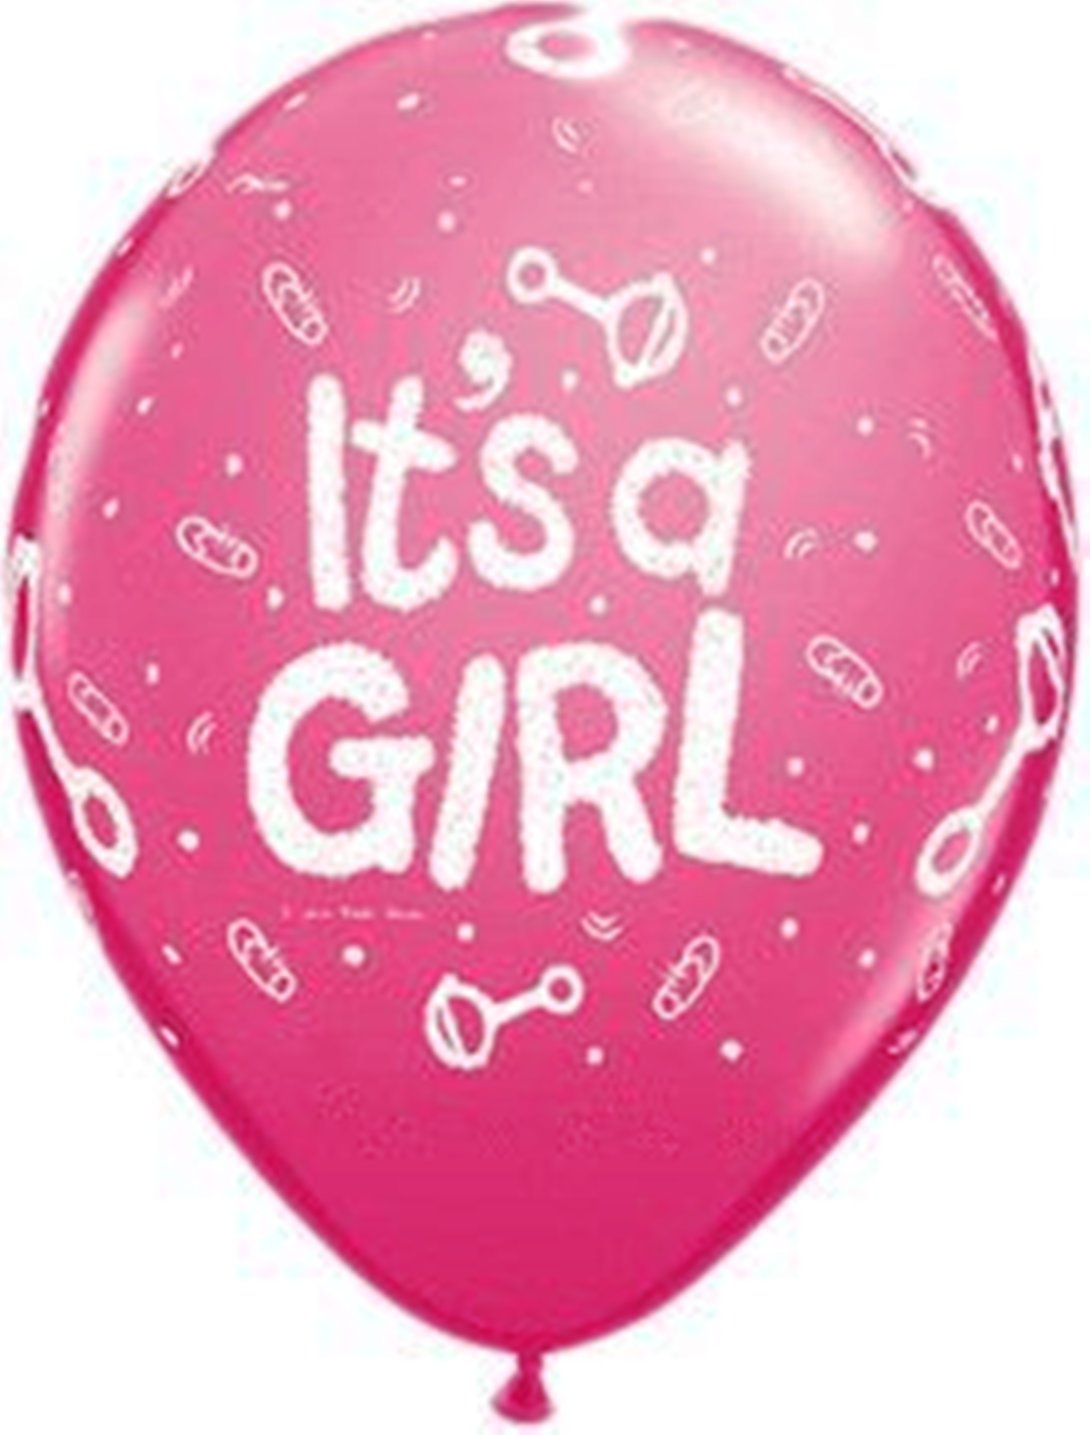 Buy Metallic Hd Balloons Its A Girl 2 Packets 50 Balloons Online ₹322 From Shopclues